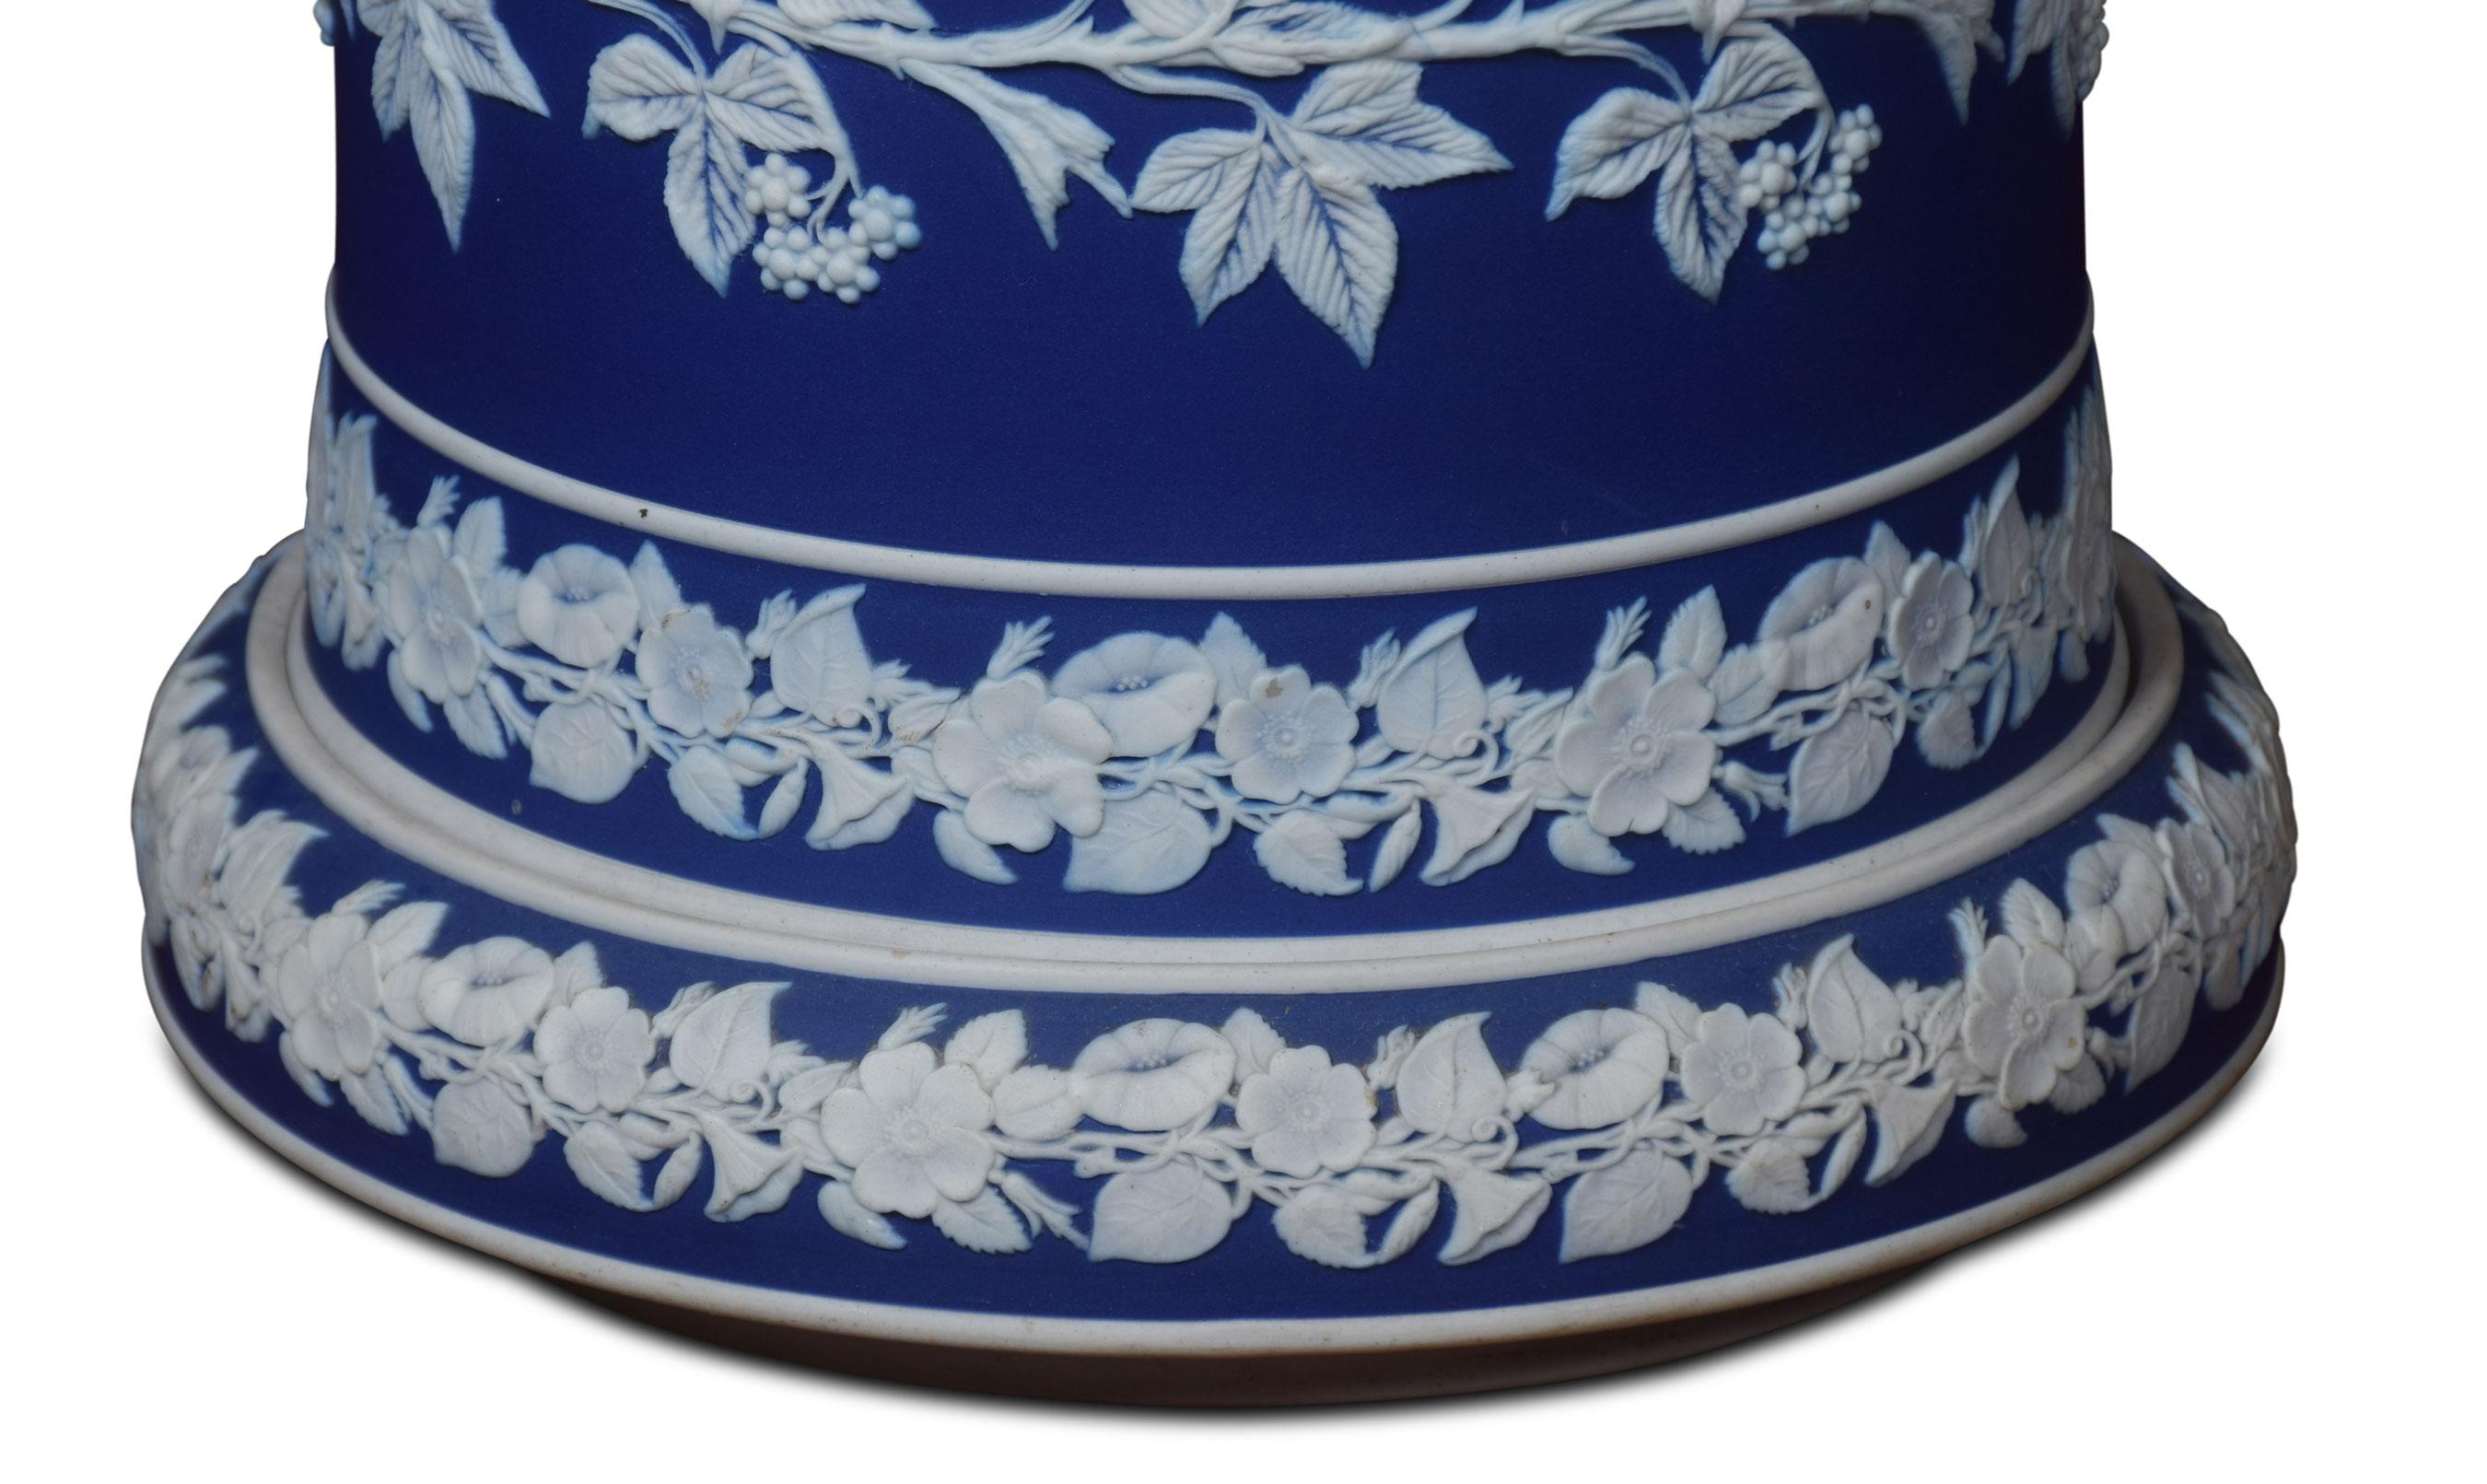 Wedgwood blue and white jasperware cheese dish with cover.
Dimensions
Height 10.5 inches
Width 9.5 inches
Depth 9.5 inches.